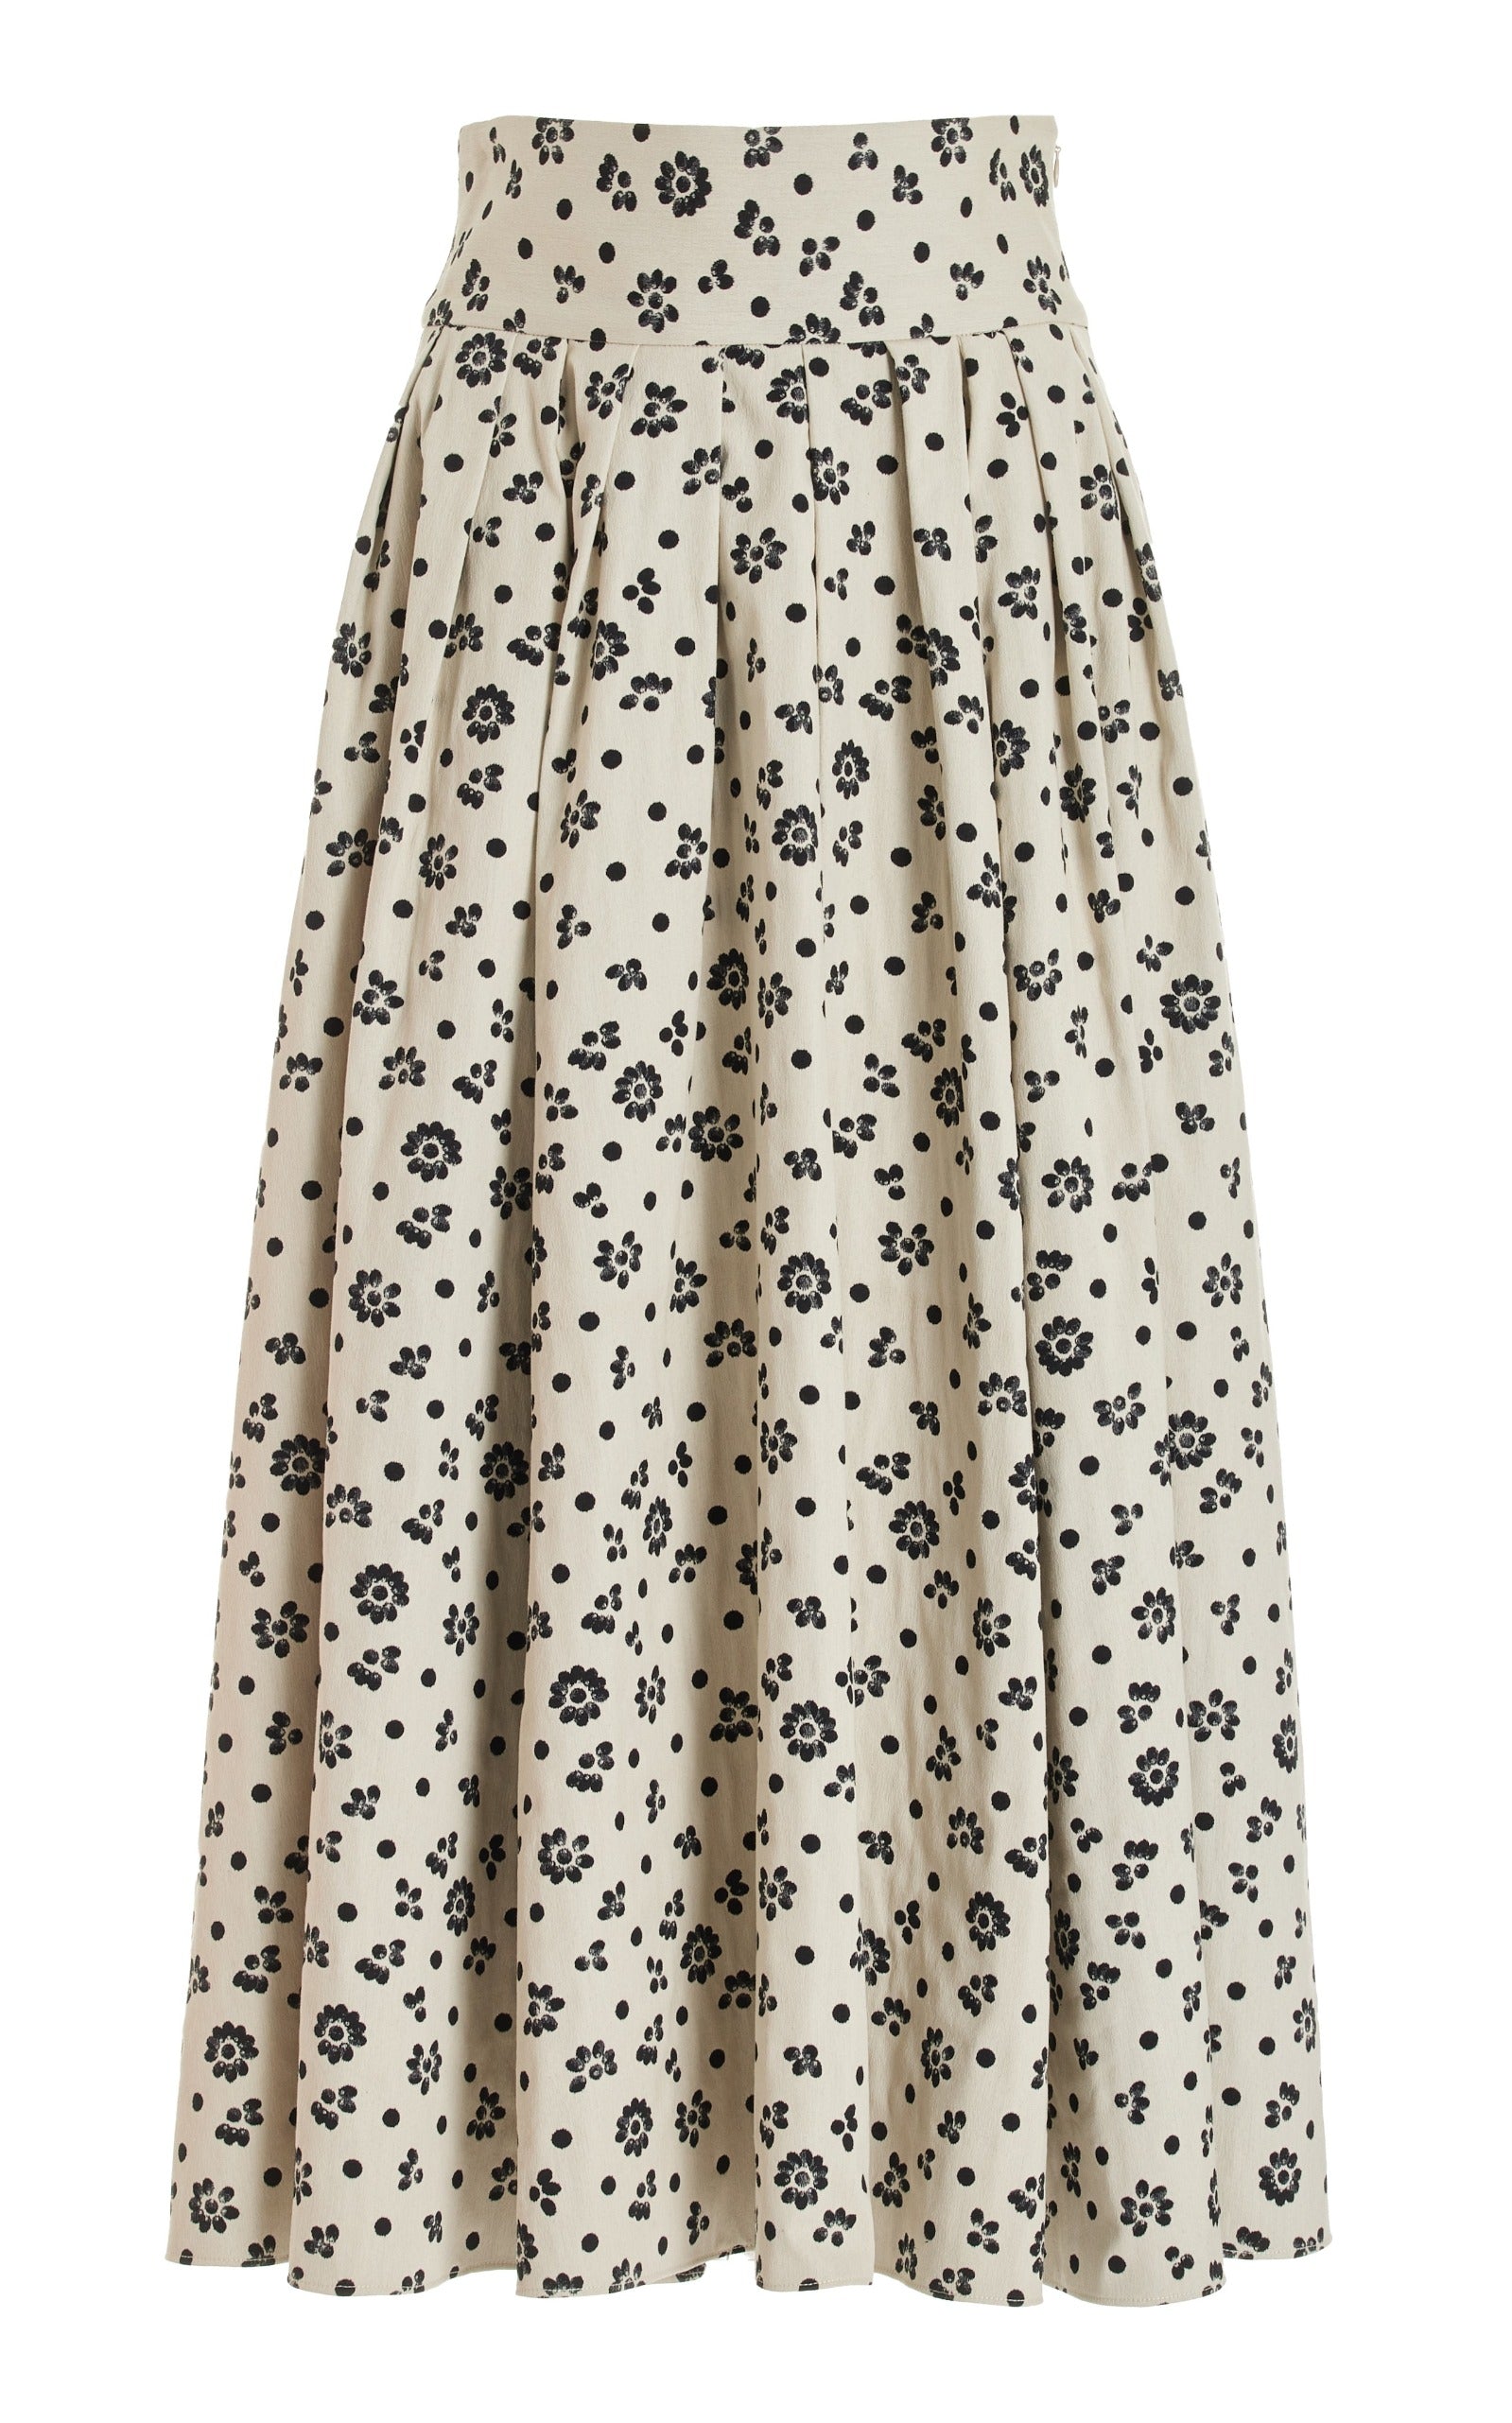 Floral Gathered Skirt in Double Faced Floral Stretch Jacquard